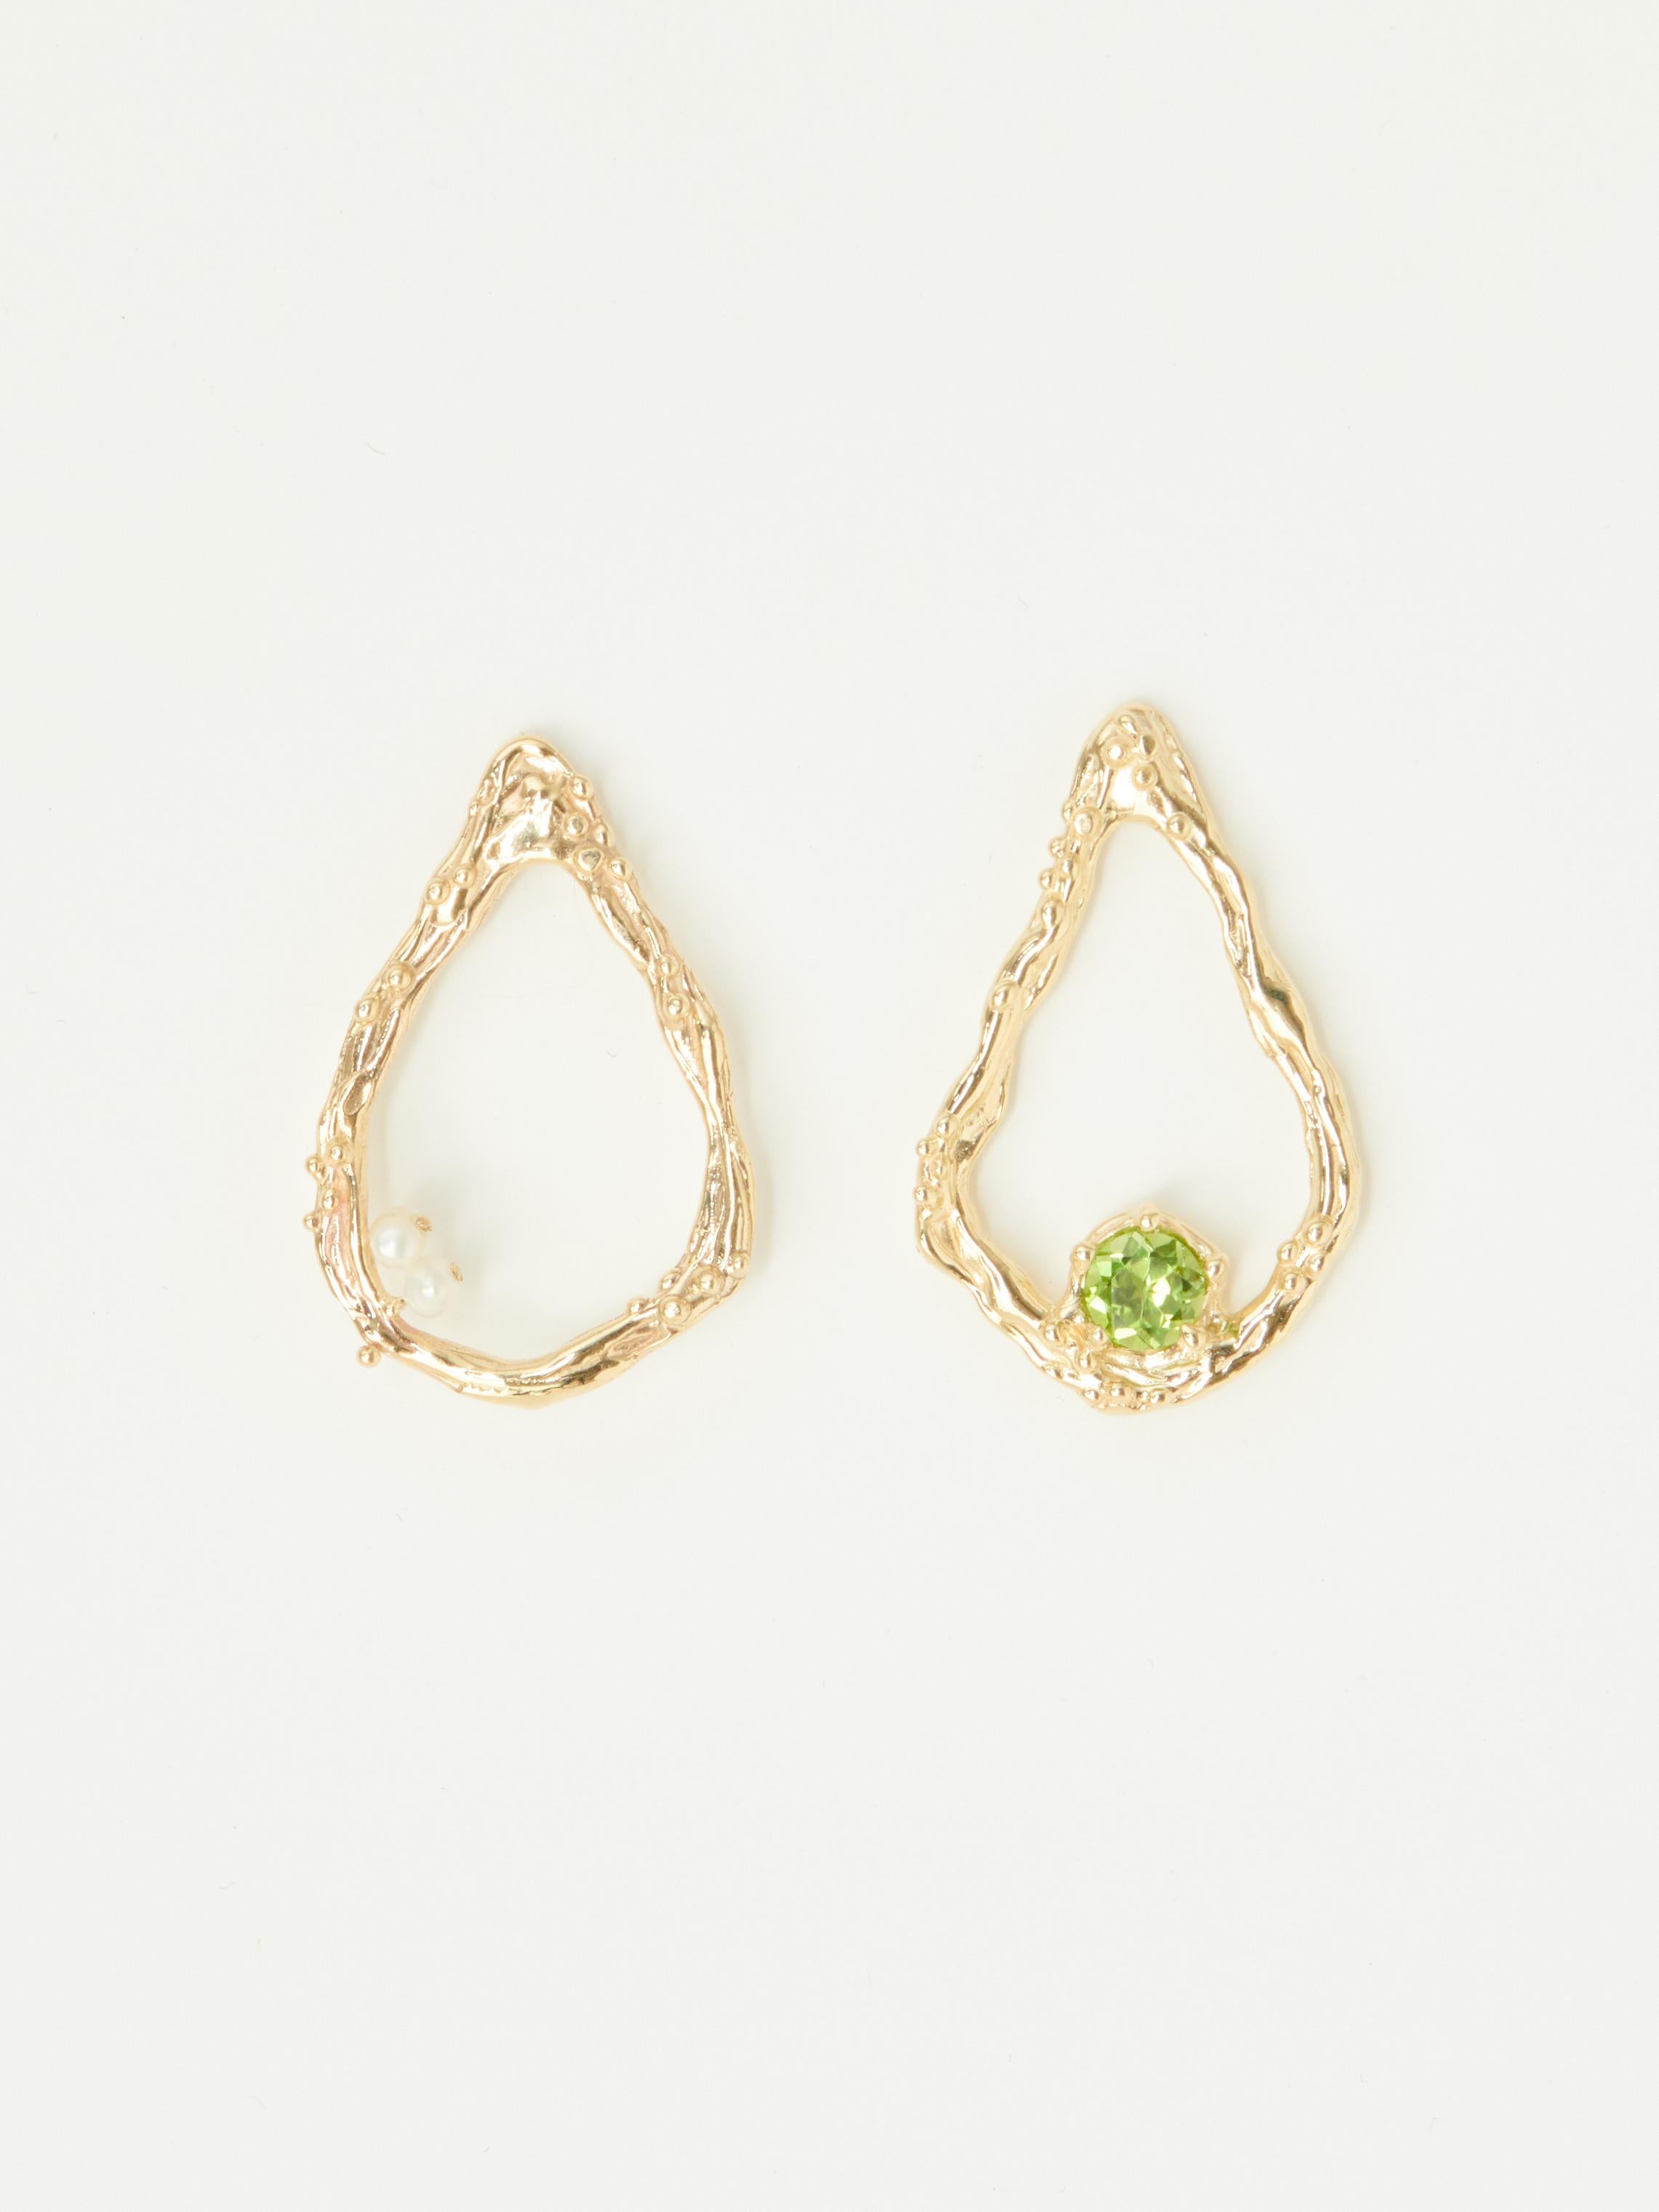 Artist Drop earrings with Peridot and Pearls For Sale